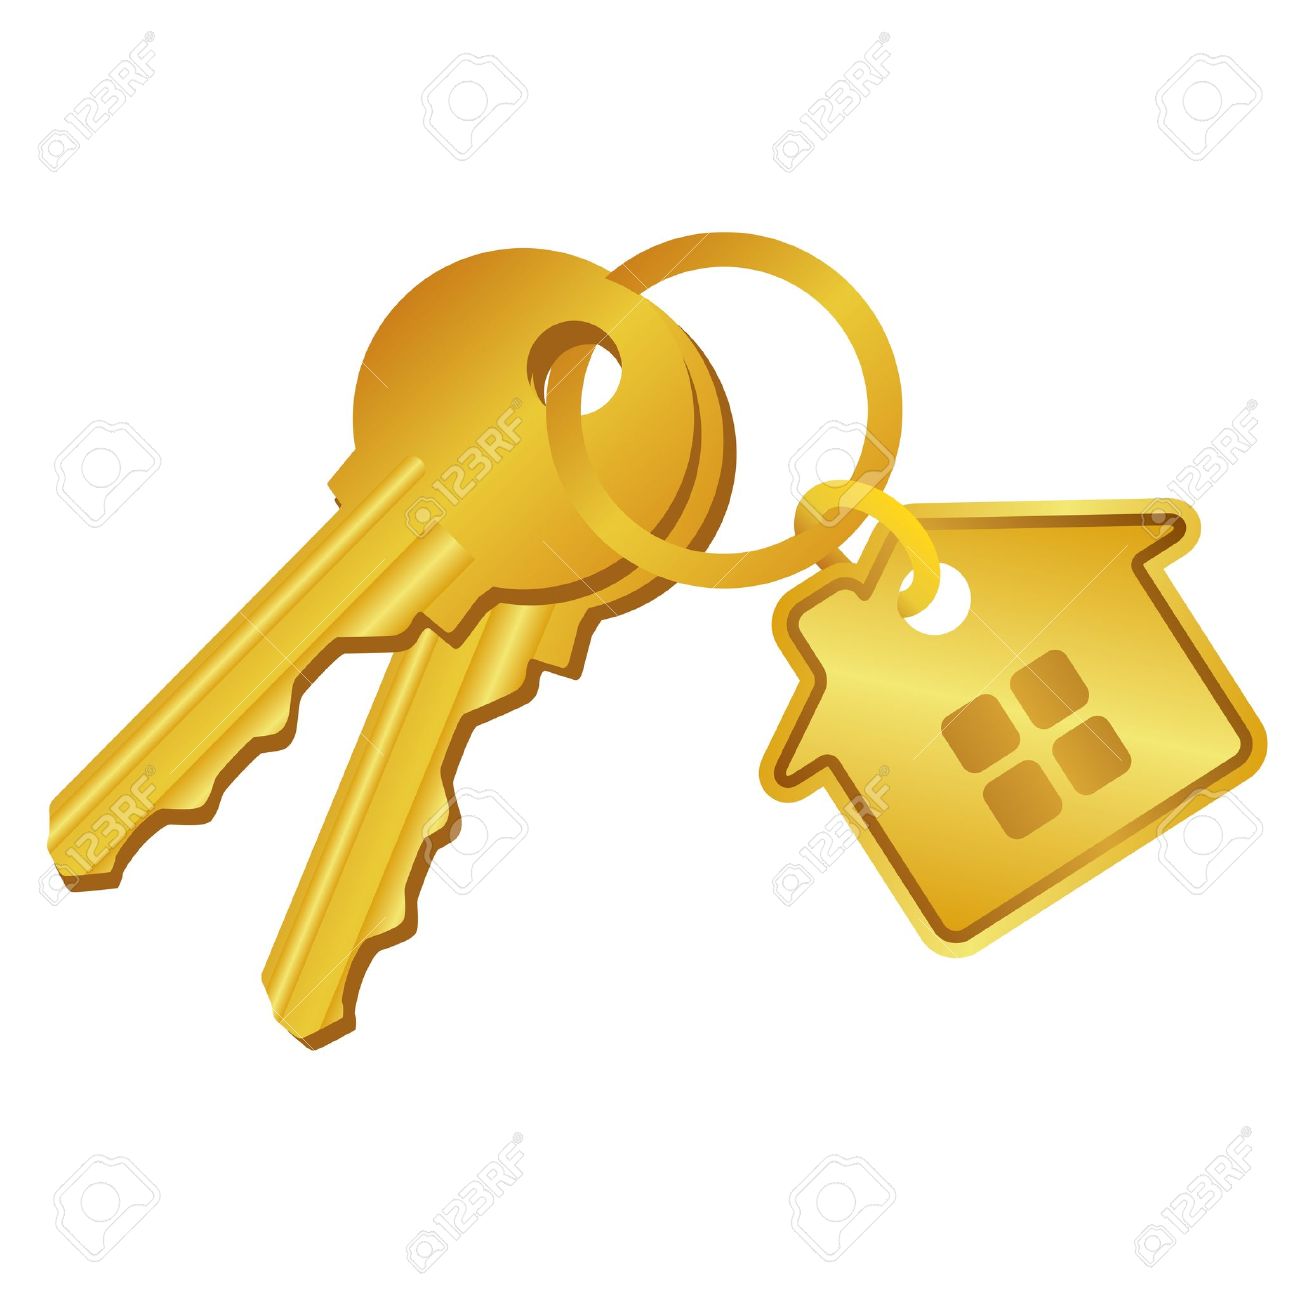 House free download best. Clipart key new home